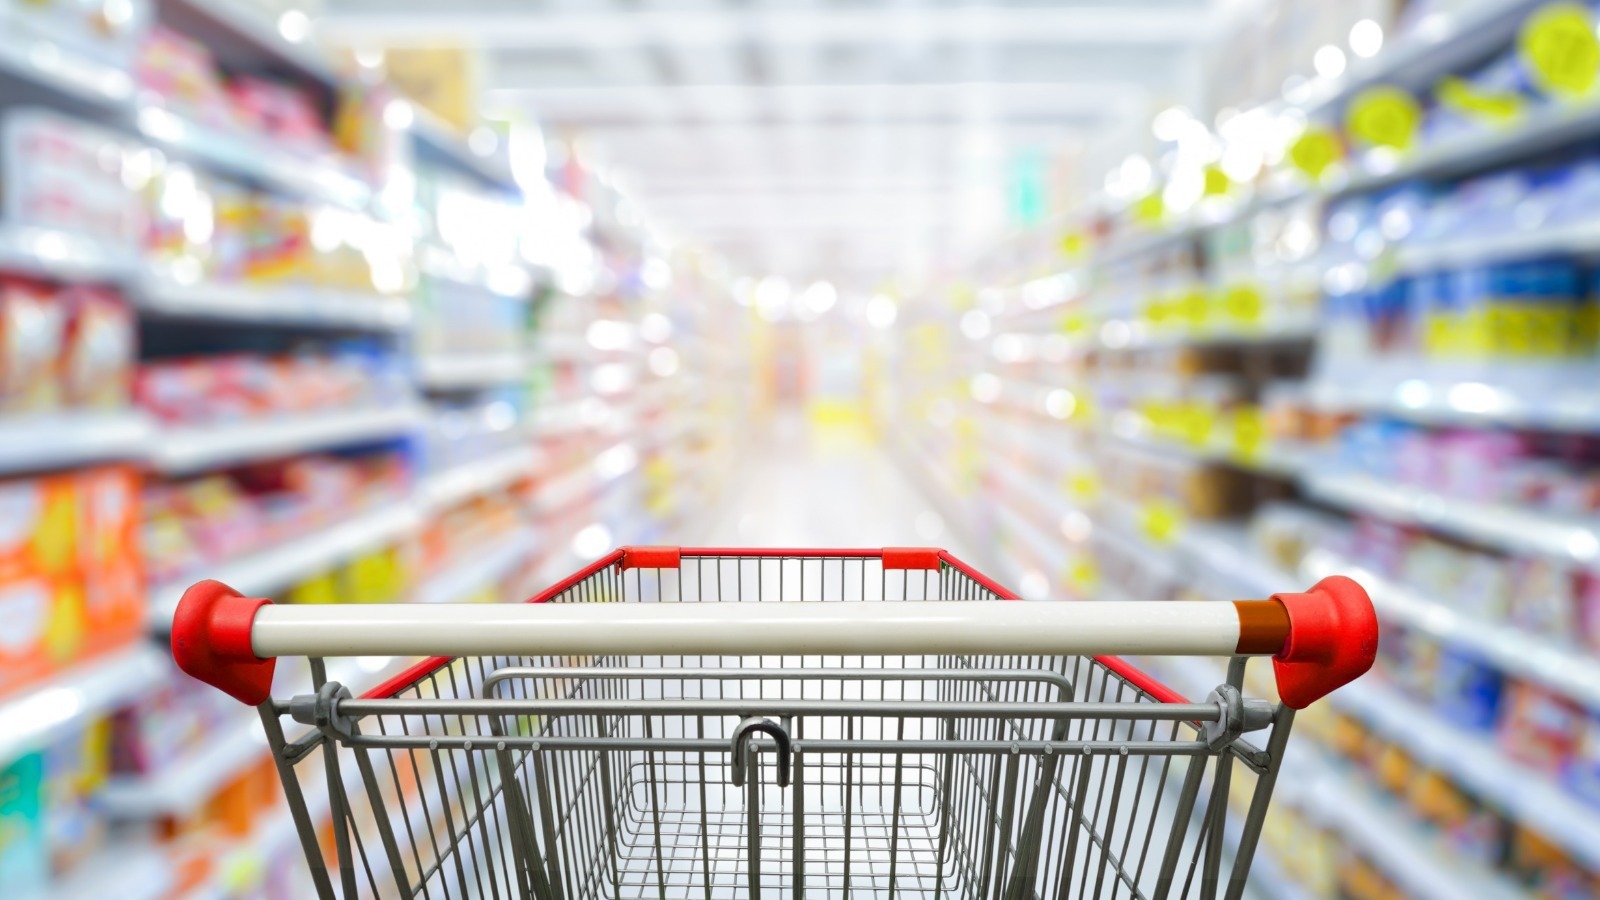 This Is the Most Popular Item Sold in Grocery Stores